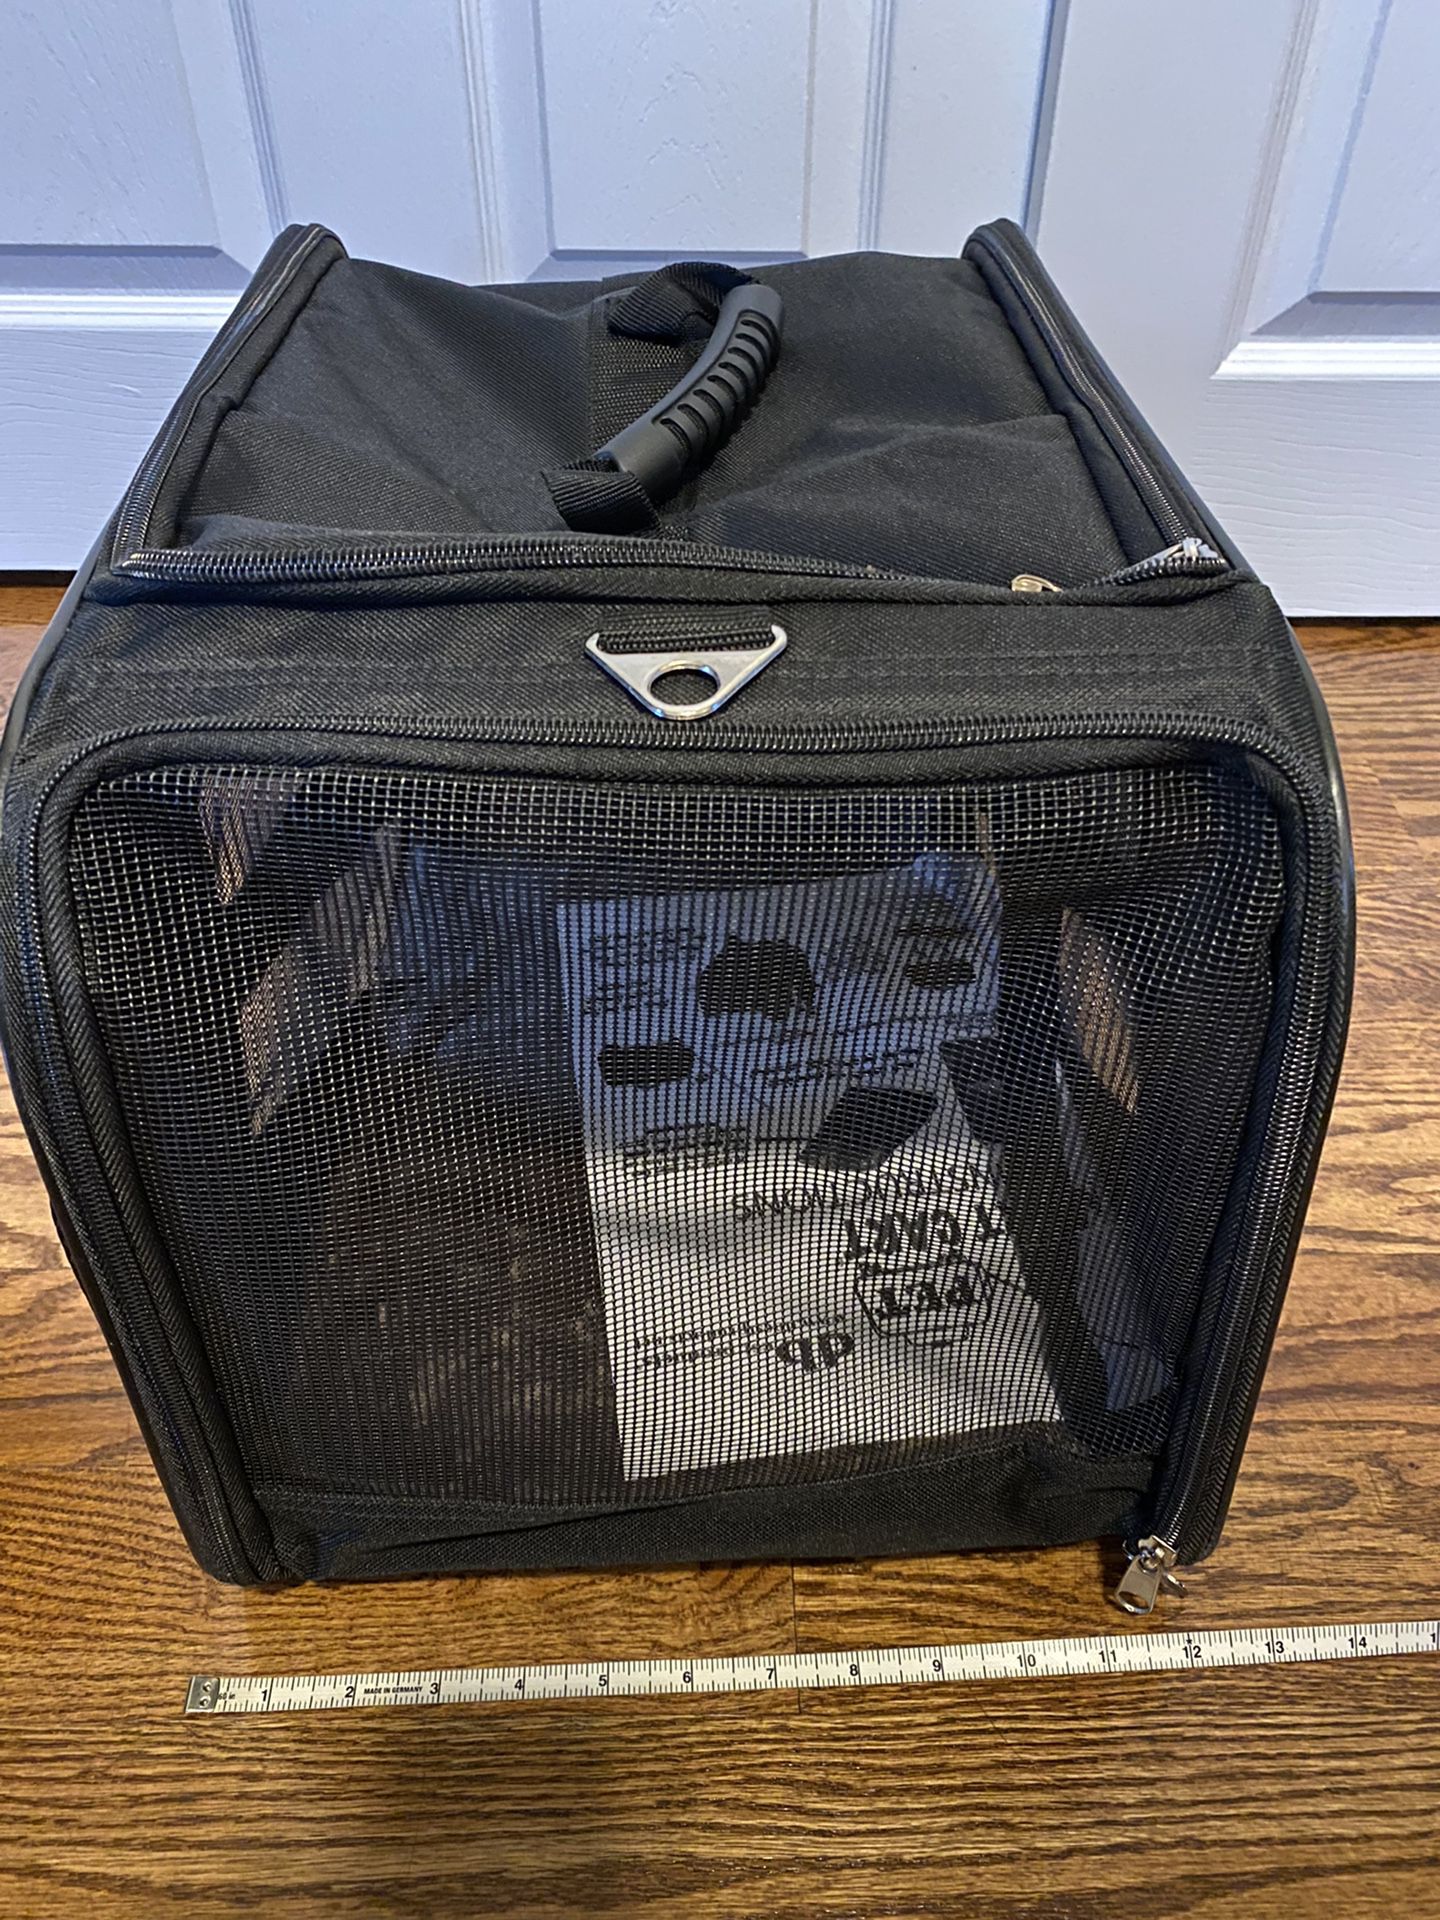 dbest Products Large Pet Carrier *Brand NEW* 